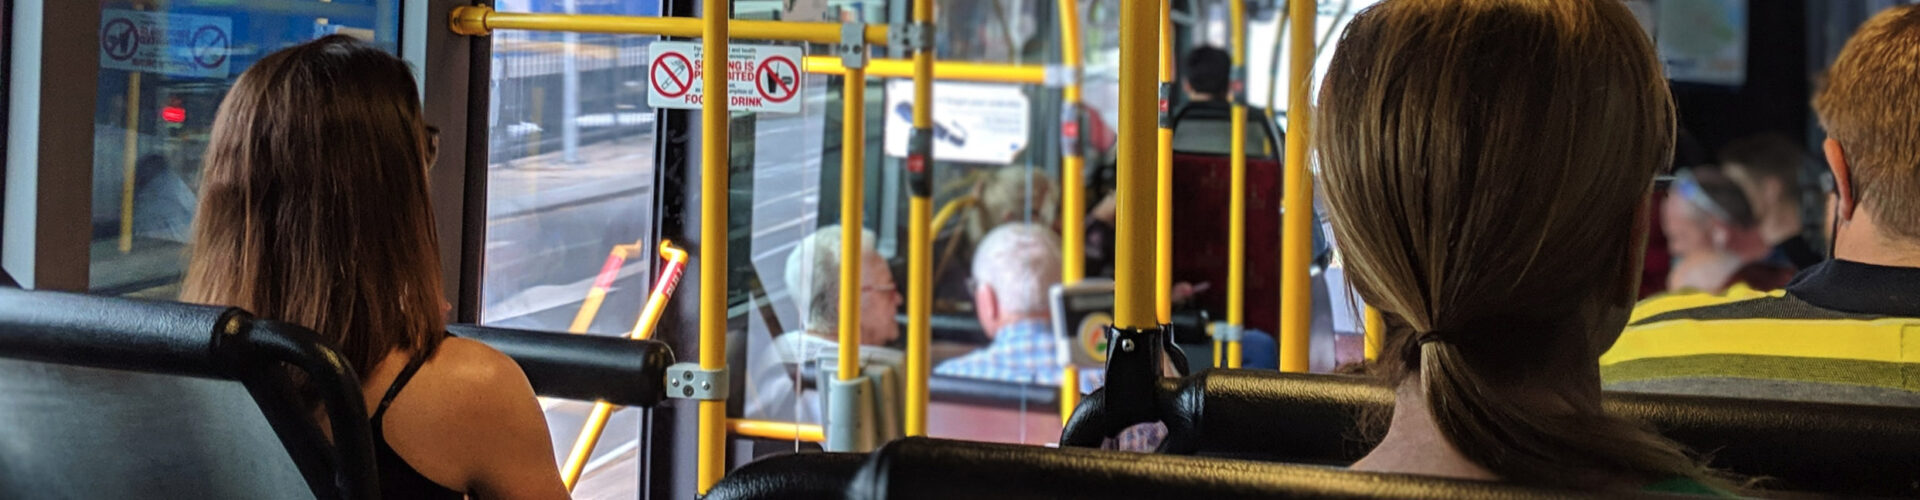 People sitting on a bus